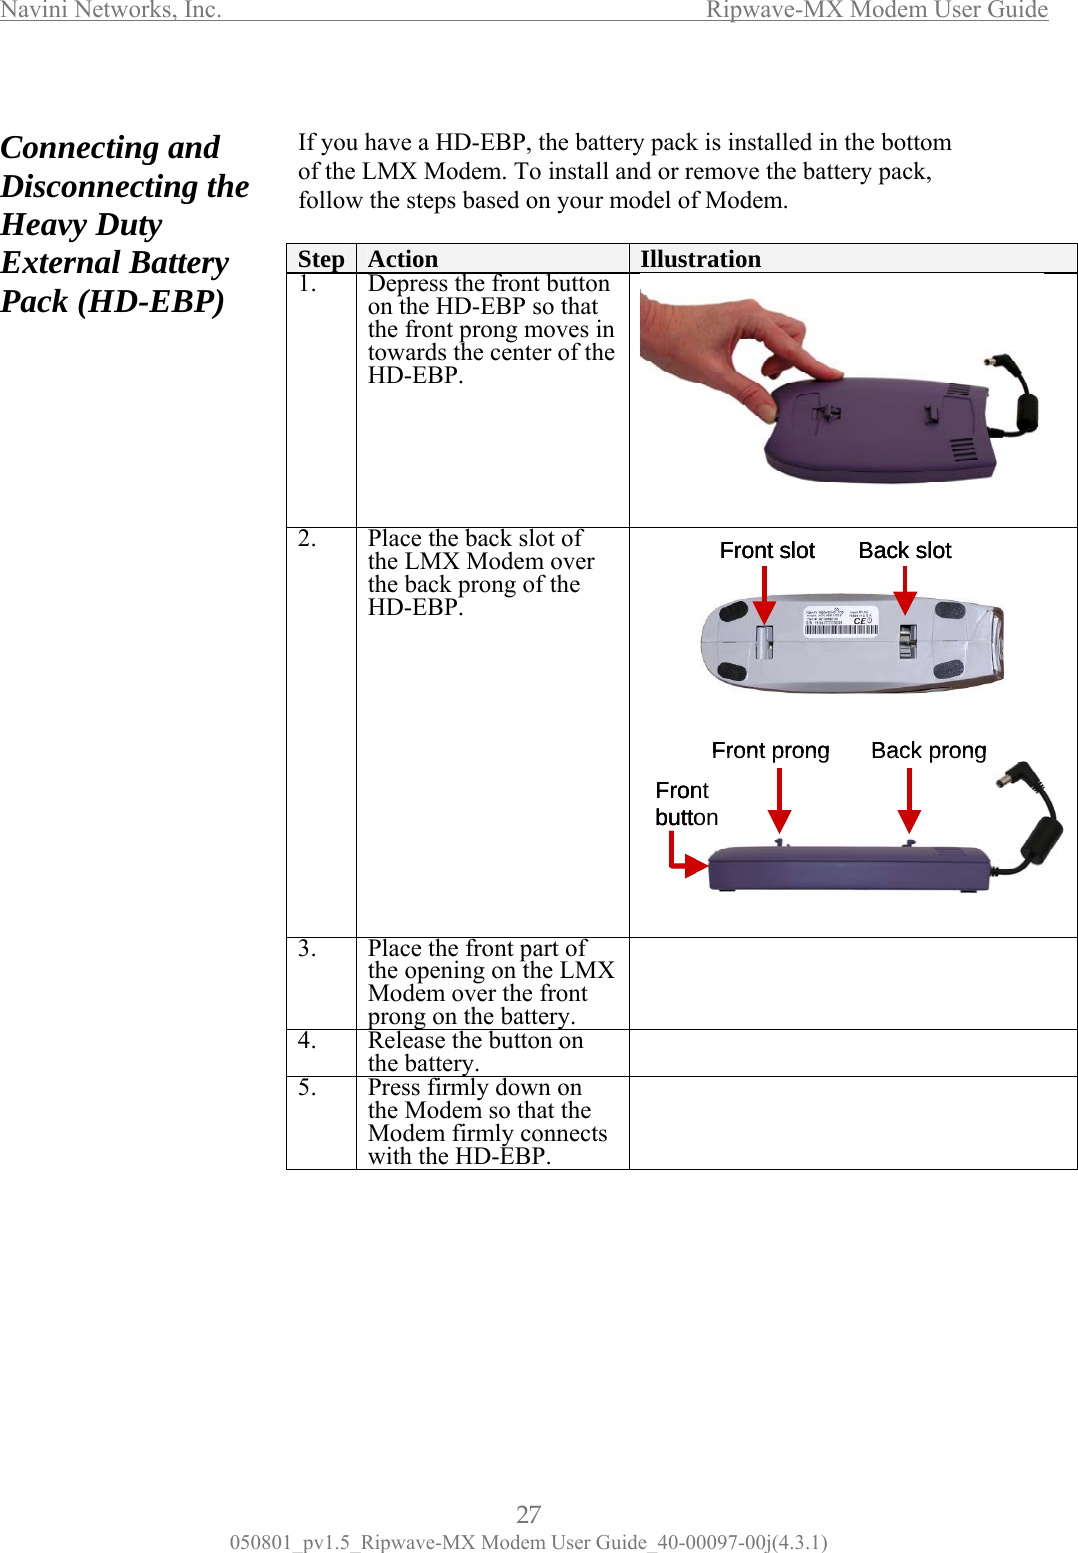 Navini Networks, Inc.                  Ripwave-MX Modem User Guide  Connecting and  isconnecting the eavy Duty xternal Battery ack (HD-EBP)  If yof t ck, foll DHEP                                        ou have a HD-EBP, the battery pack is installed in the bottom he LMX Modem. To install and or remove the battery paow the steps based on your model of Modem. Step  Action  Illustration 1.  De e front buon the HD-EBP so that the front prong moves intowards the center of theH press th tton   D-EBP. 2.  Place the back slot of the LMX Modem over the back prong of the HD-EBP.  3.  Place the front part of the opening on the LMX Modem over the front prong on the battery.  4.  Release the button on the battery.   5.  Press firmly down on the Modem so that the Modem firmly connects with the HD-EBP.           FrontbuttonFront prong Back prongFront slot Back slotFrontbuttonFront prong Back prongFrontbuttonFront prong Back prongFront slot Back slotFront slot Back sl ot27 050801_pv1.5_Ripwave-MX Modem User Guide_40-00097-00j(4.3.1) 